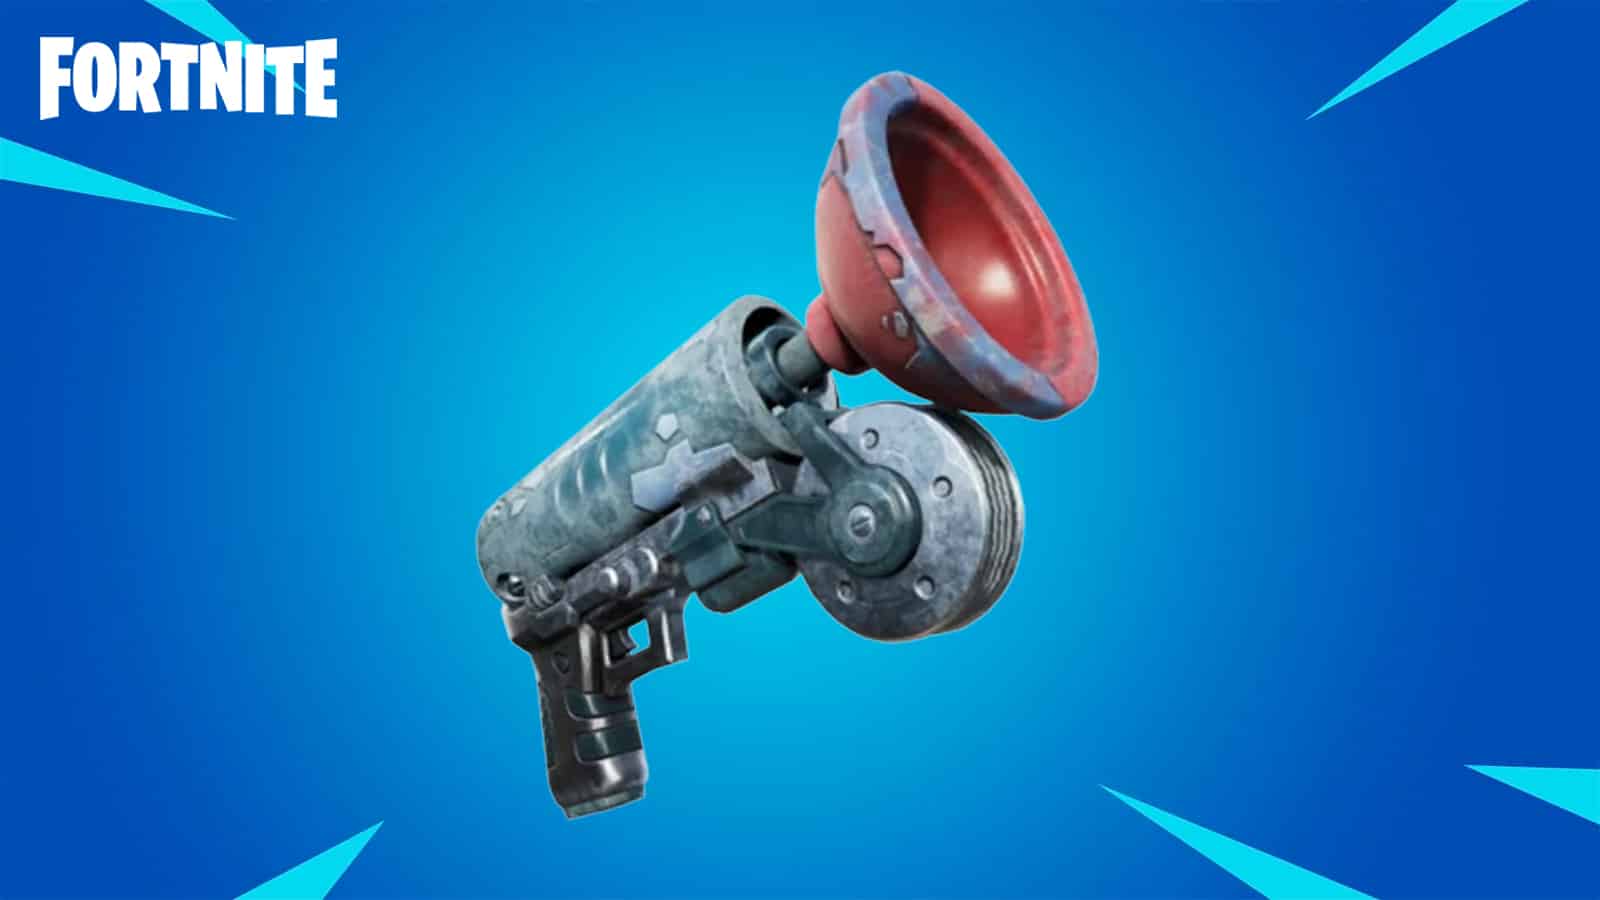 The Icy Grappler weapon in Fortnite